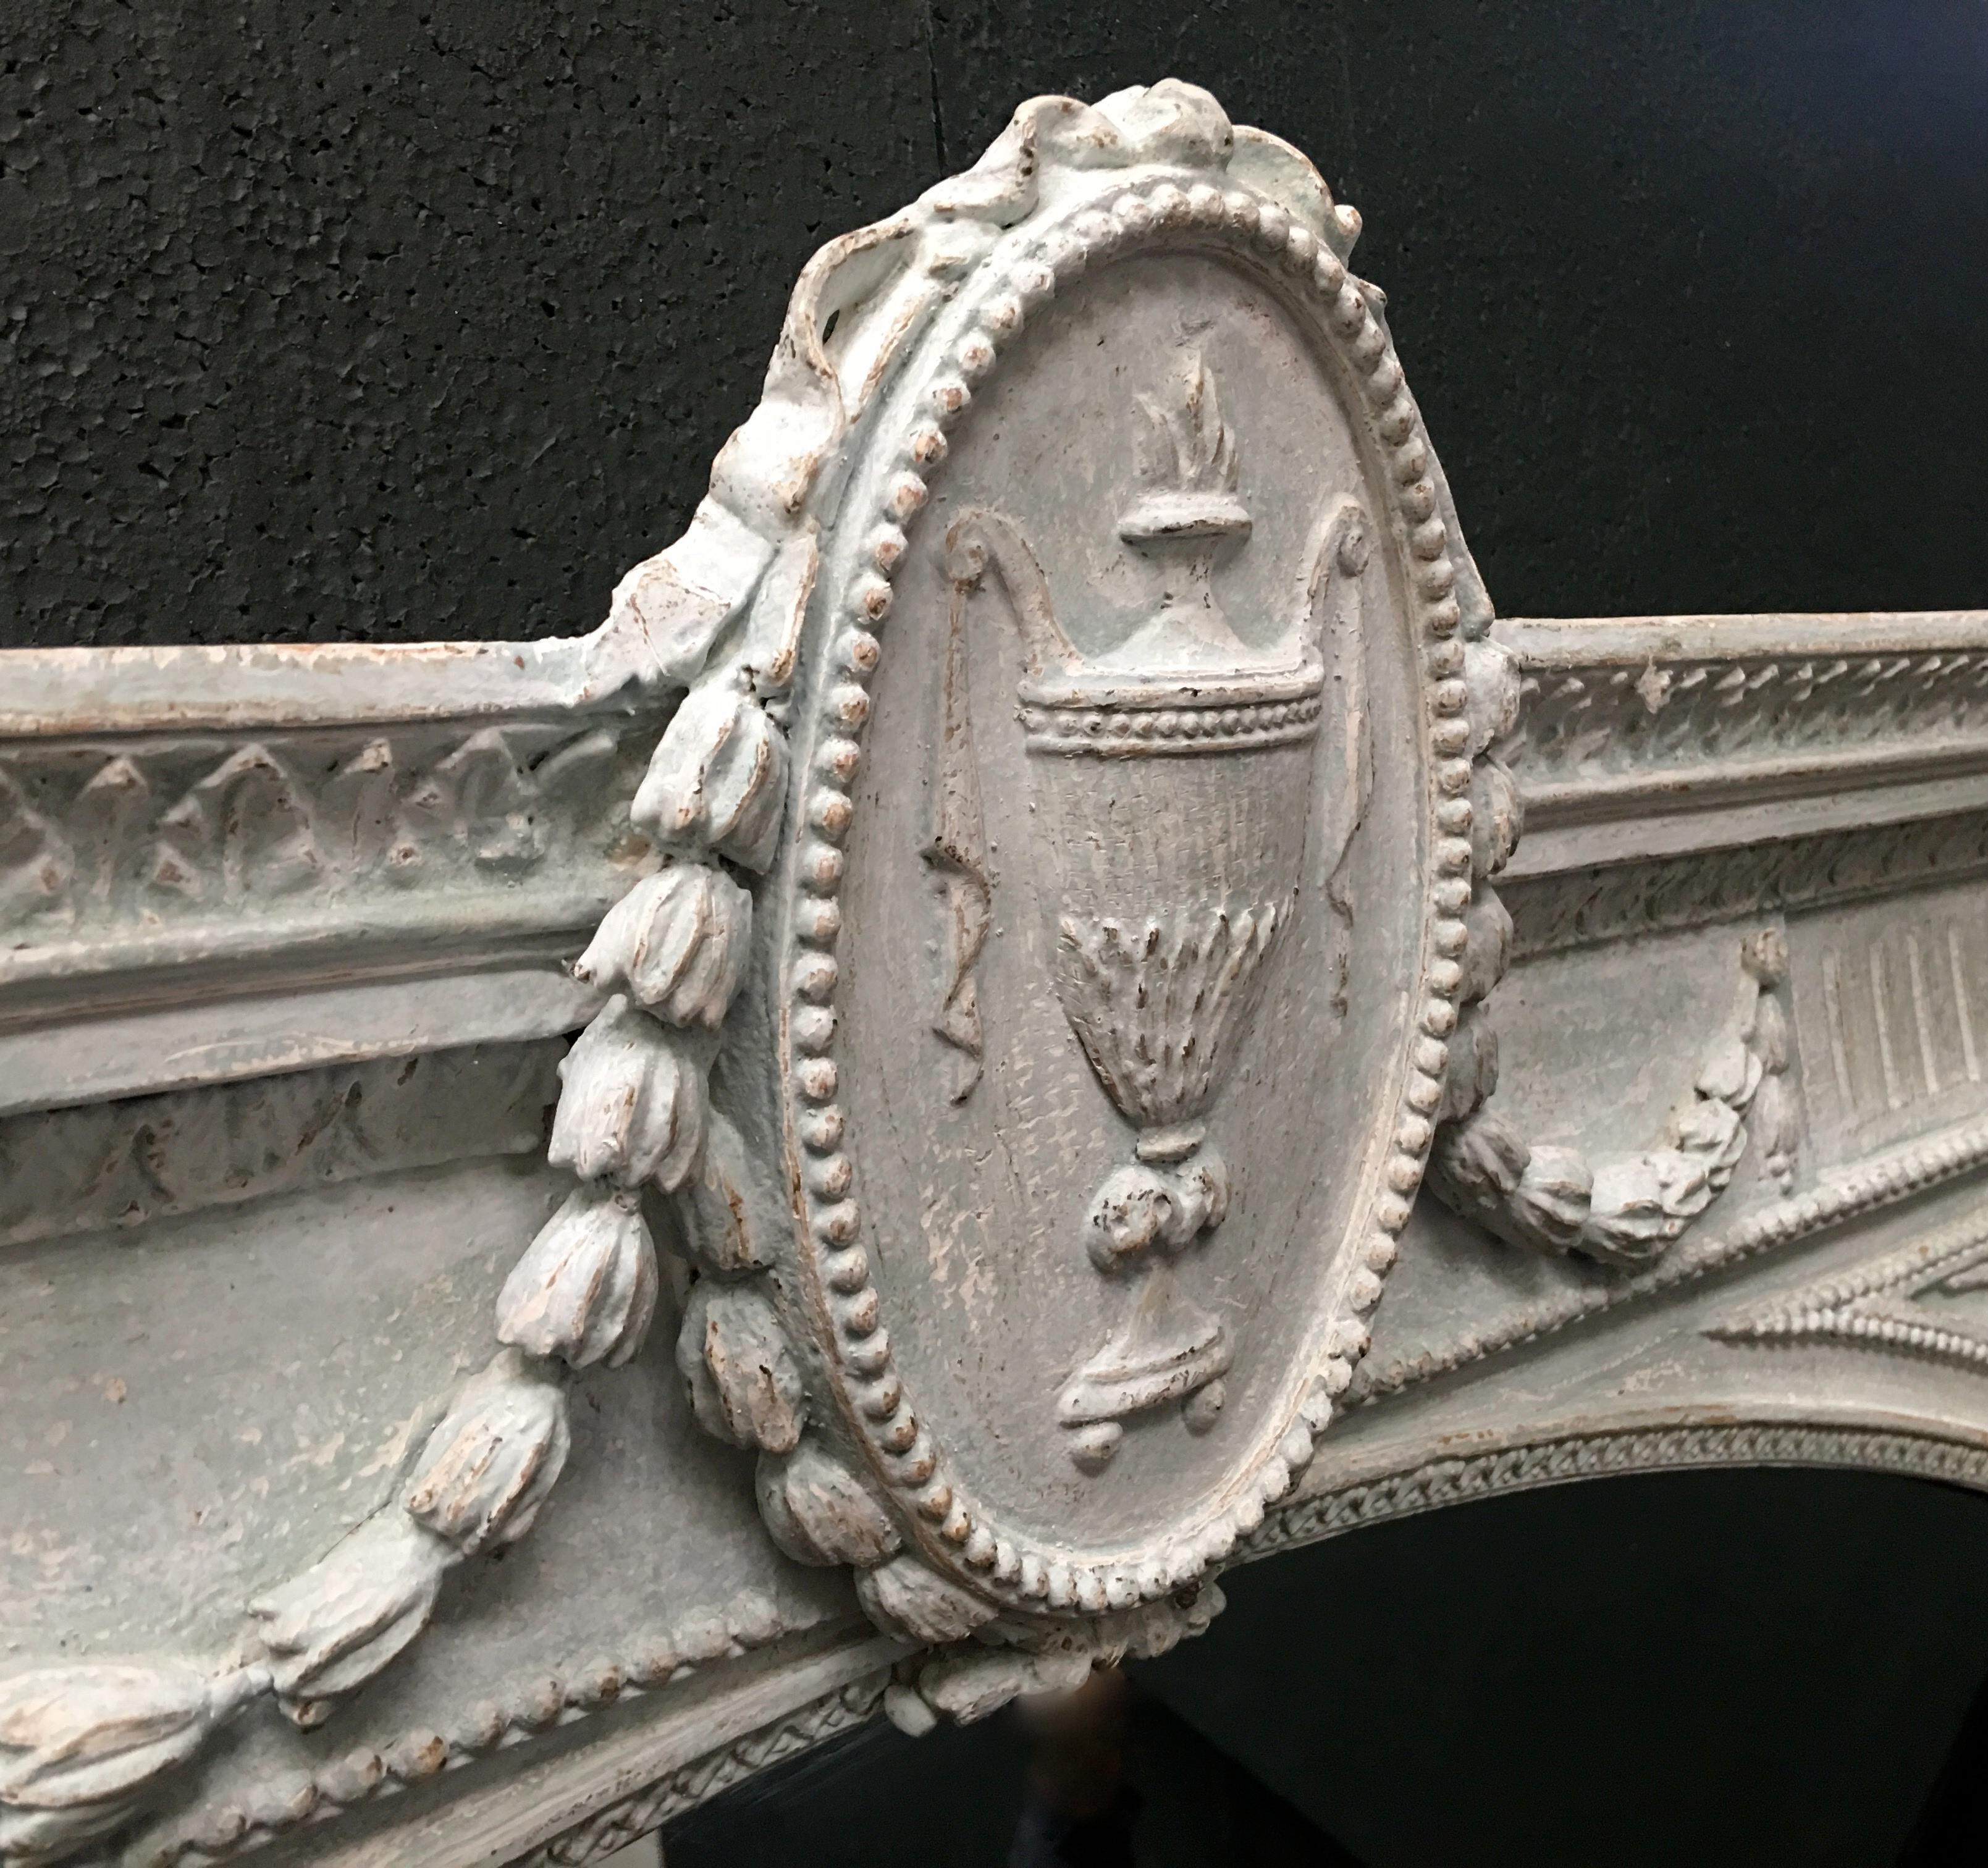 This mirror was sourced from a large 19th century beachfront residence in the south of England. When purchased, the mirror was covered in white household gloss paint. Our restoration team have carefully dry scraped off these layers to reveal a